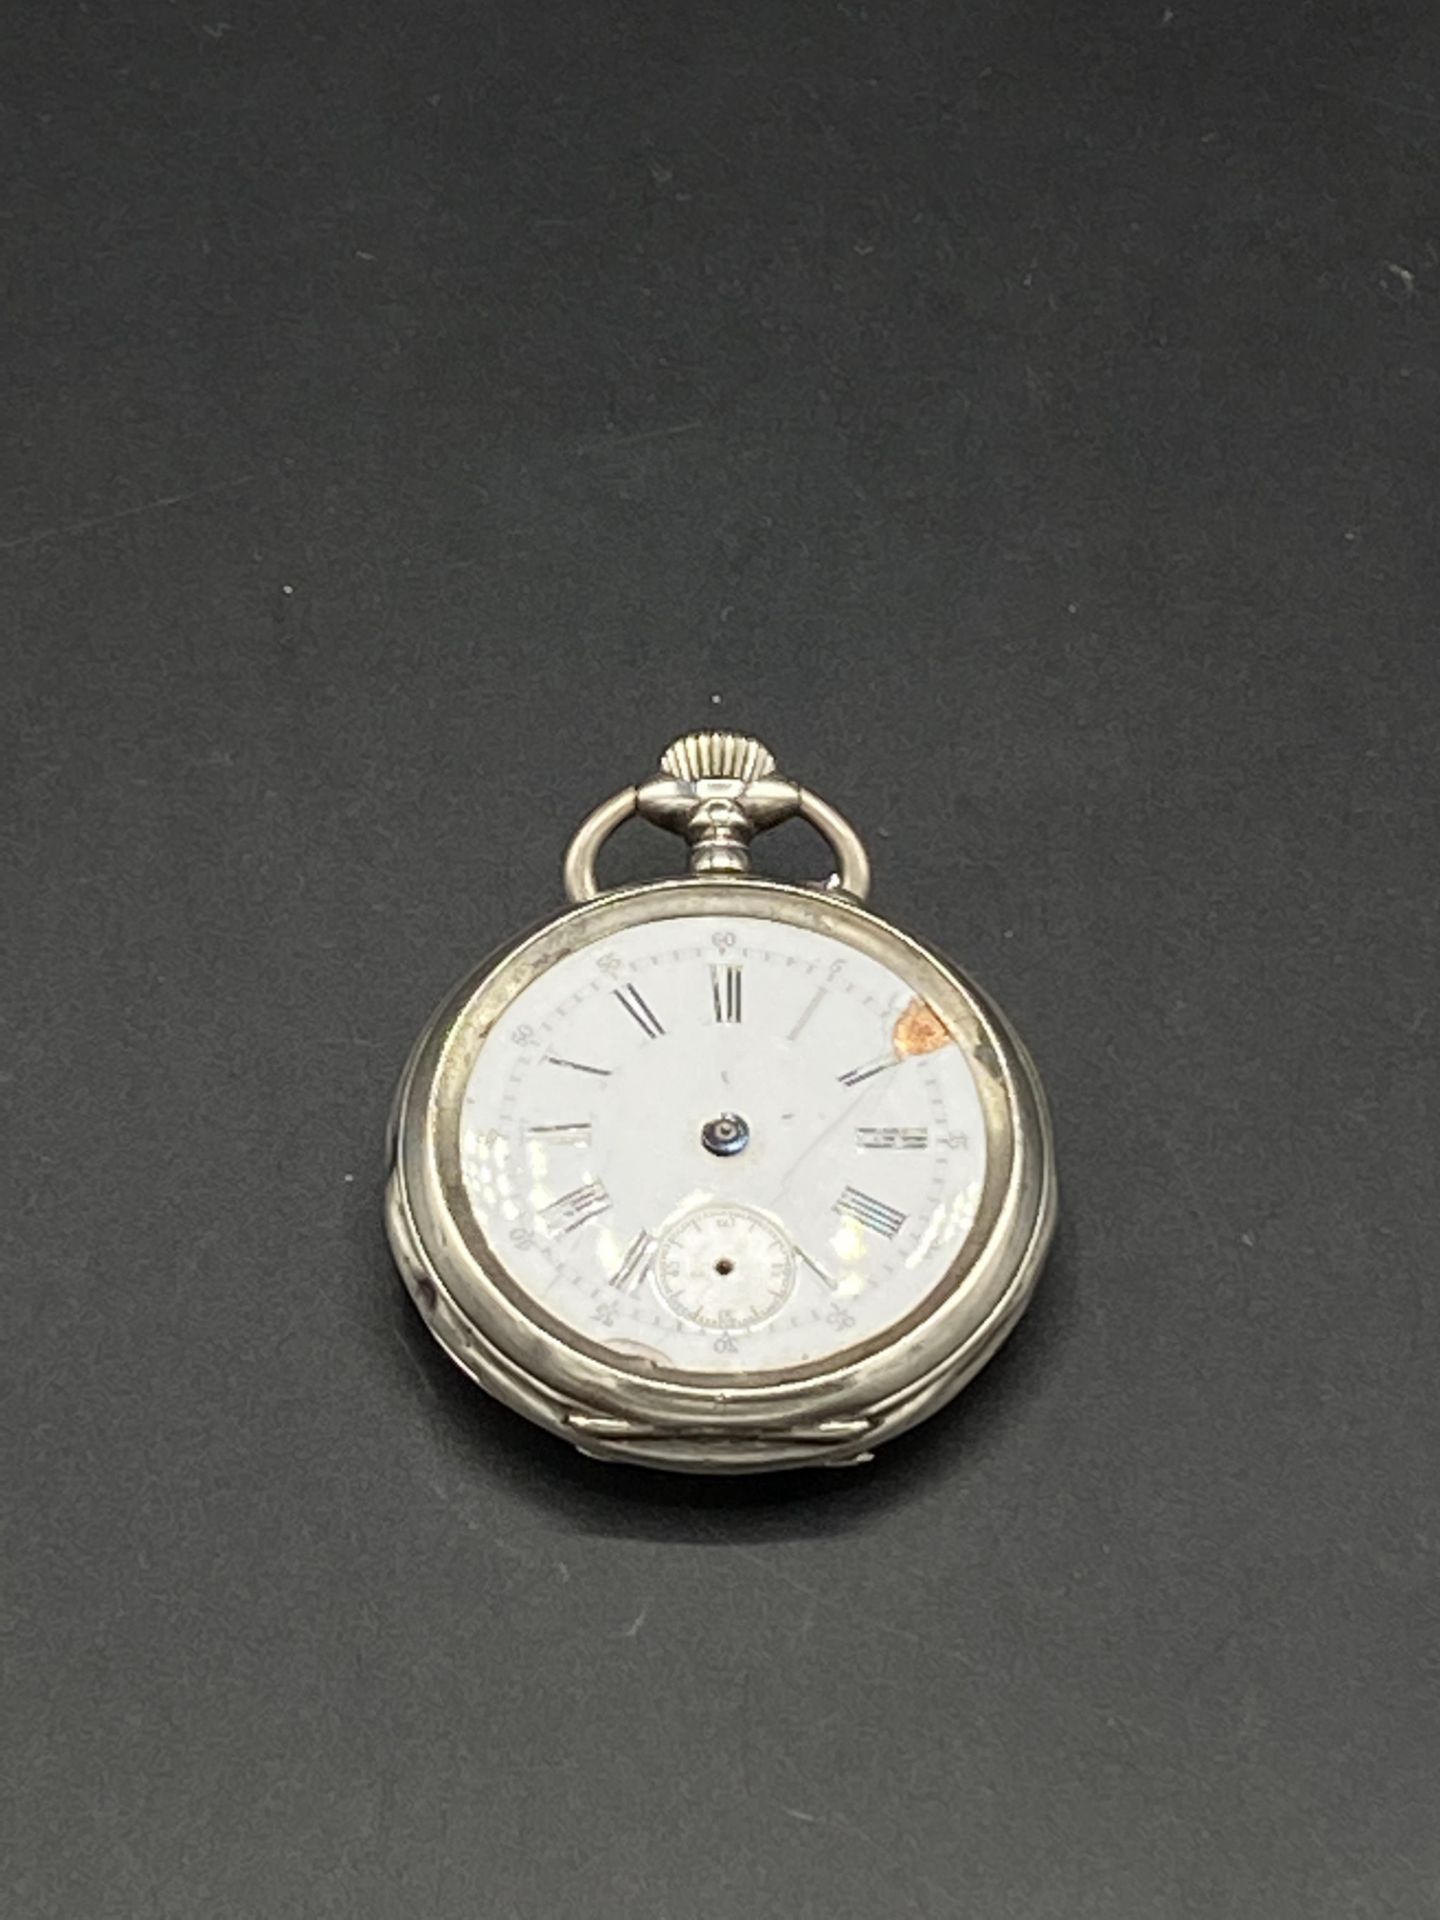 Dunhill quartz wristwatch together with two silver pocket watches and a fashion watch - Bild 5 aus 14